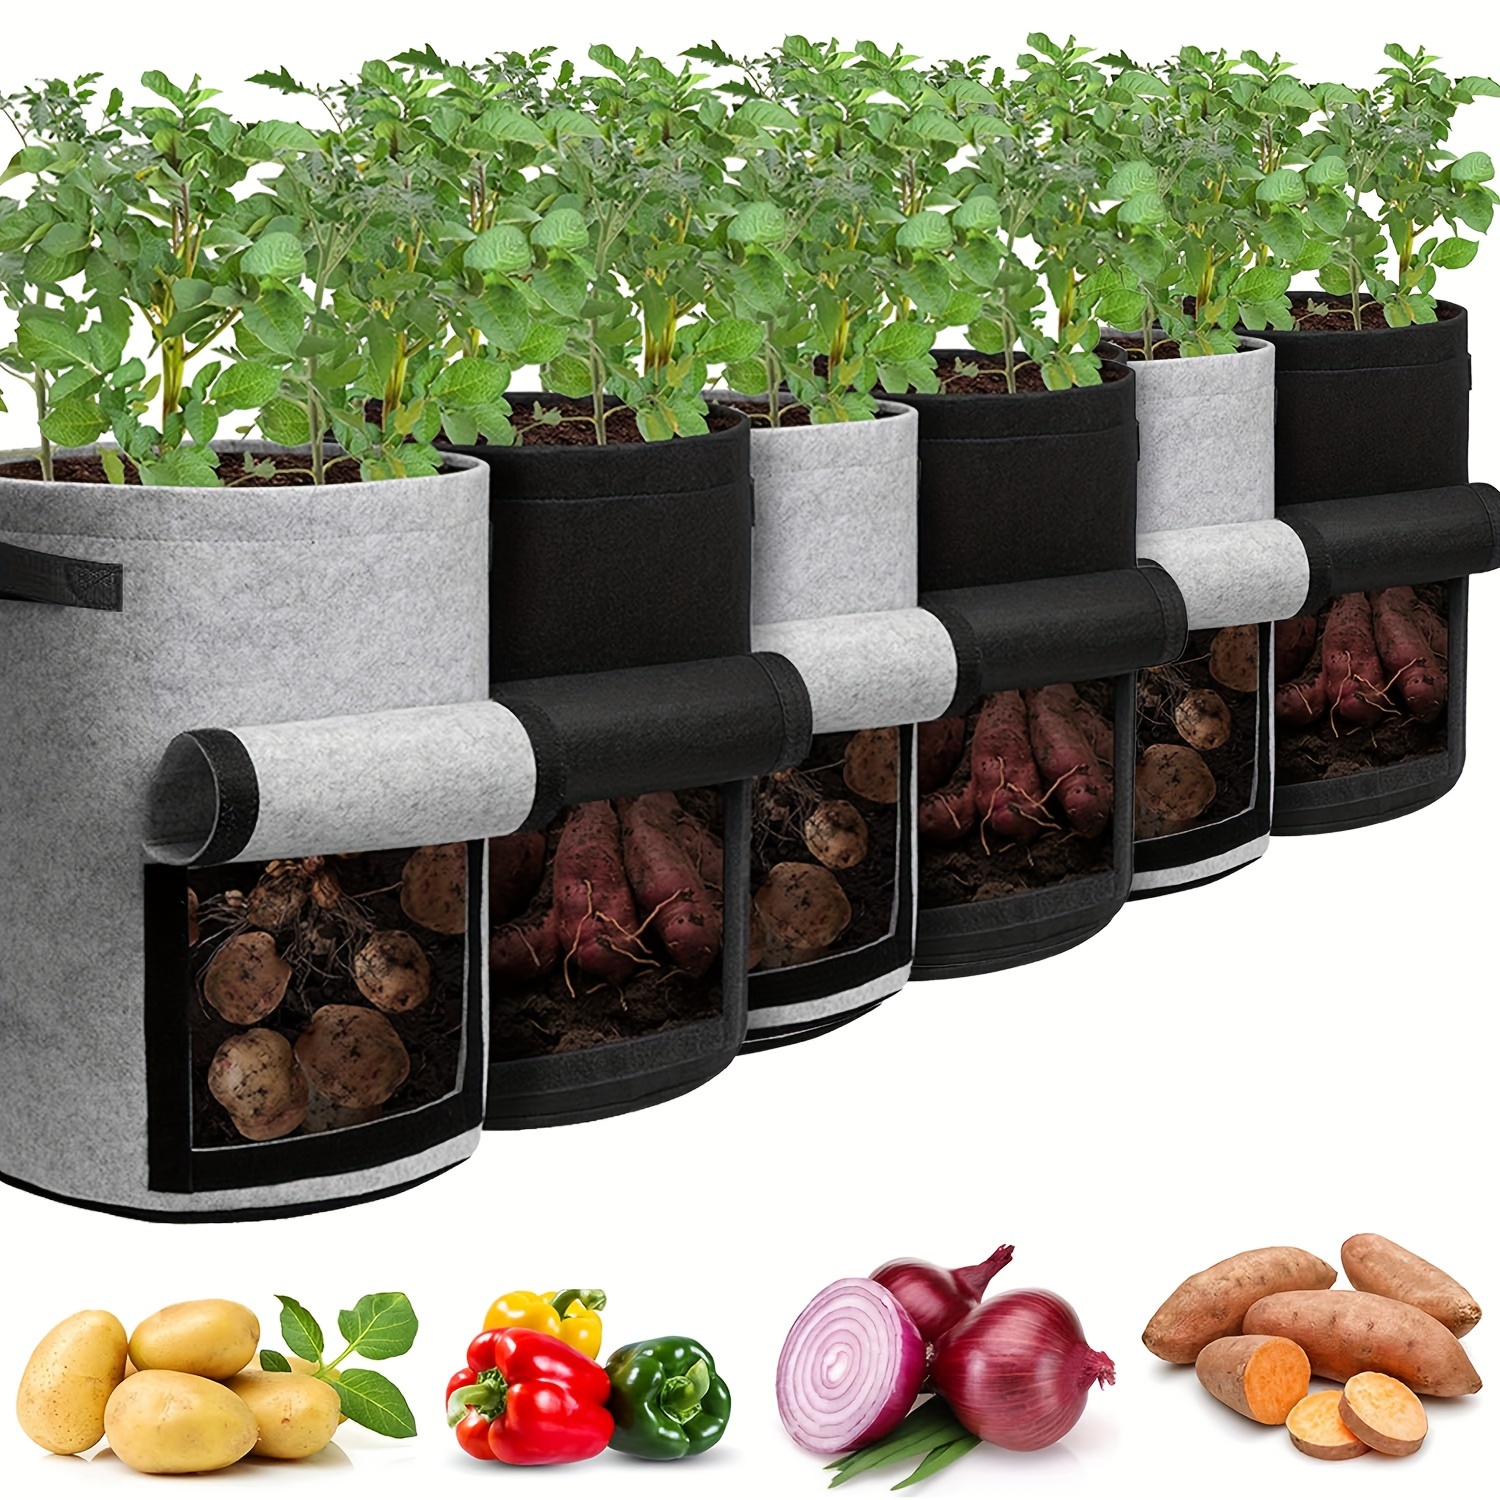 

6 Packs, 10 Gallon Potato Grow Bags With Flap Window, Garden Planting Bag With Durable Handle, Plant Pots For Tomato, Vegetable And Fruits